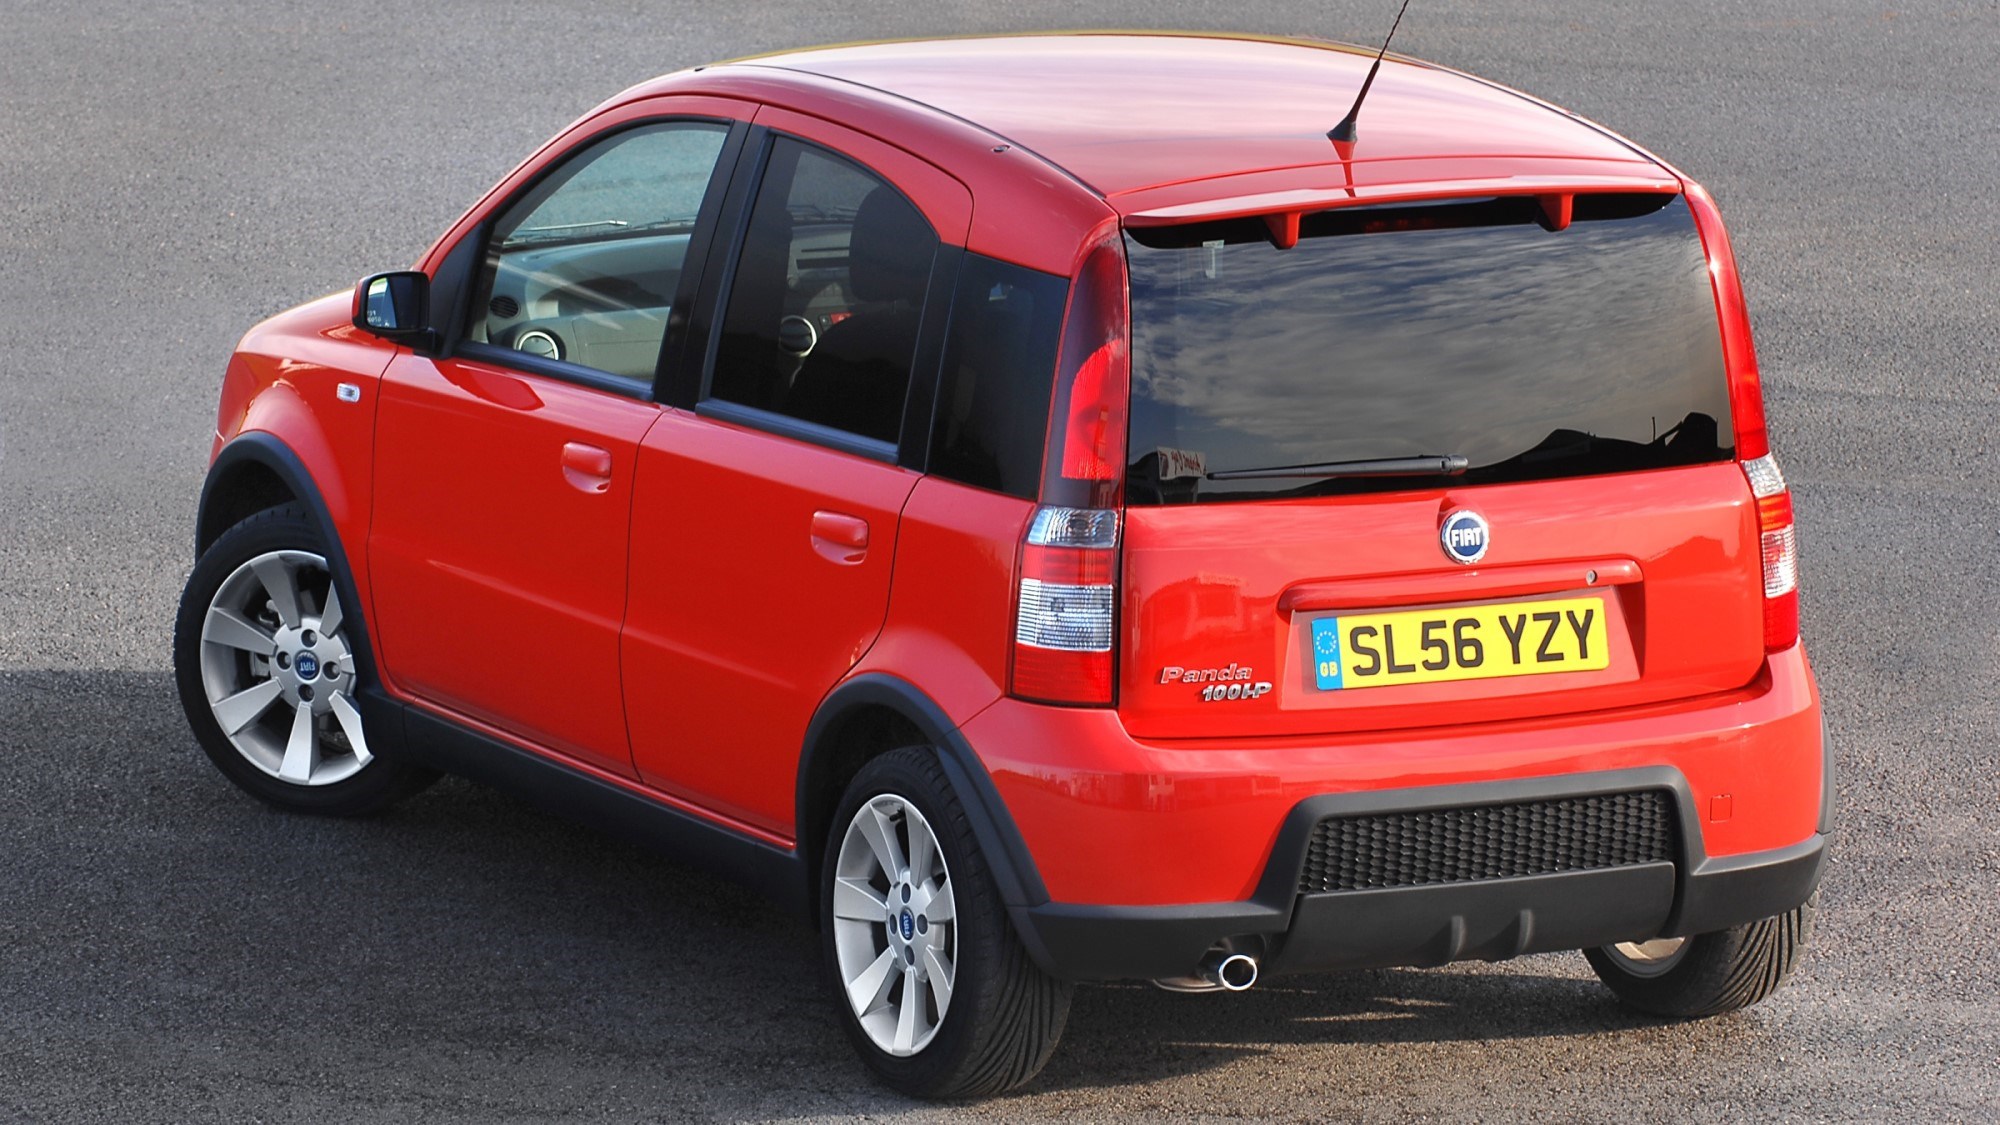 Fiat Panda 4x4 Makes A Comeback As Special Edition Model